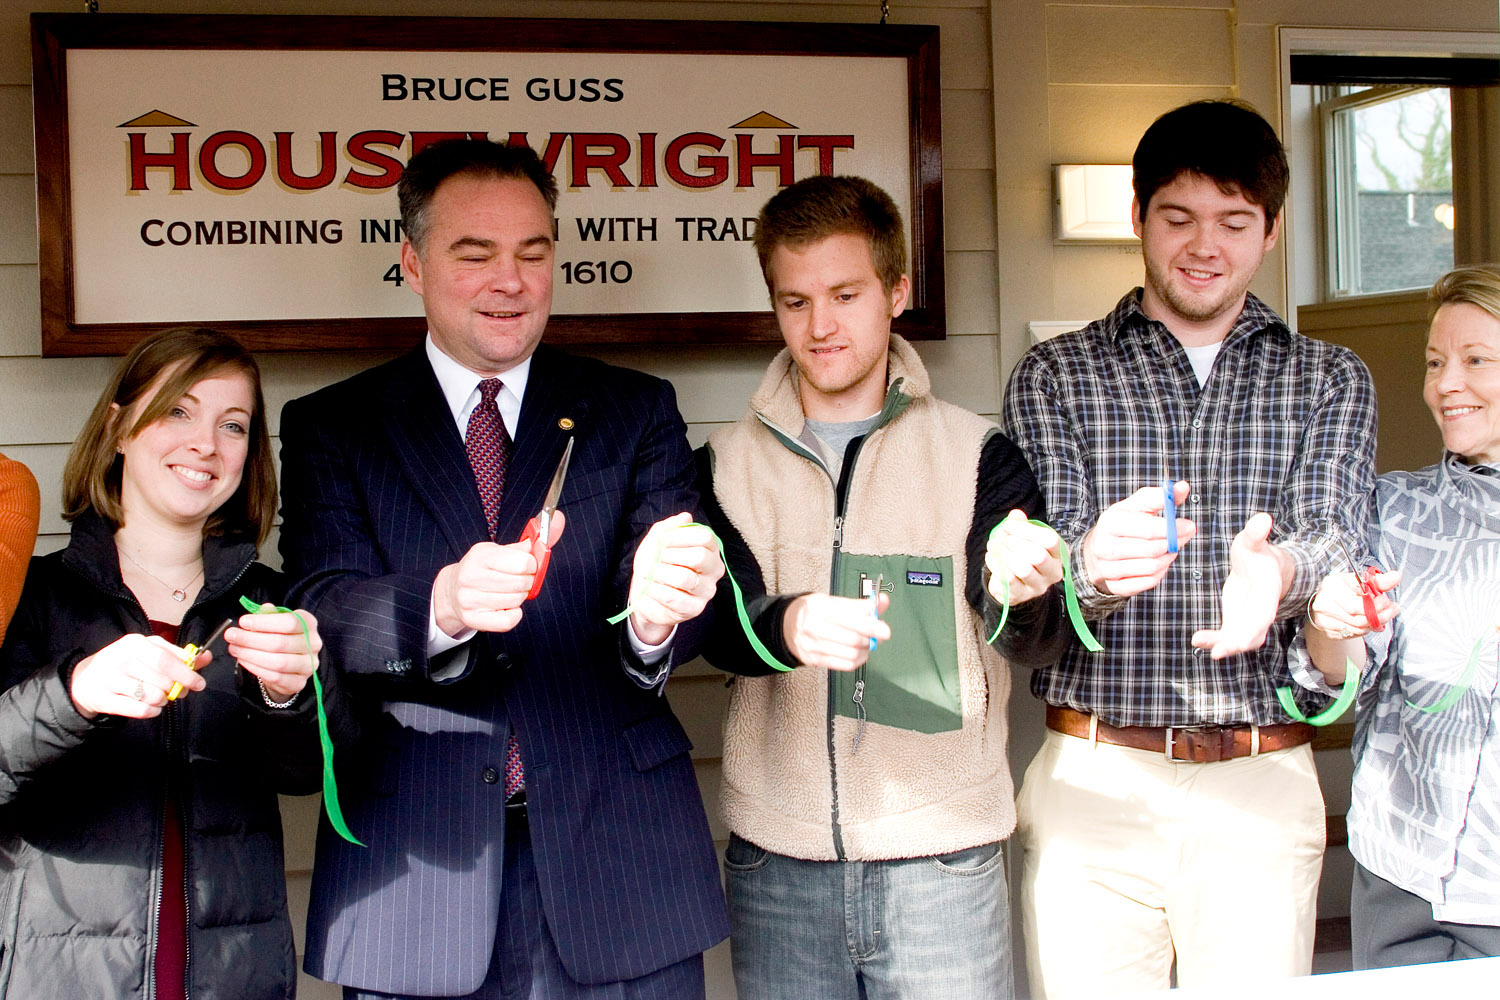 Gov. Timothy Kaine cuts a ribbon with a group of people